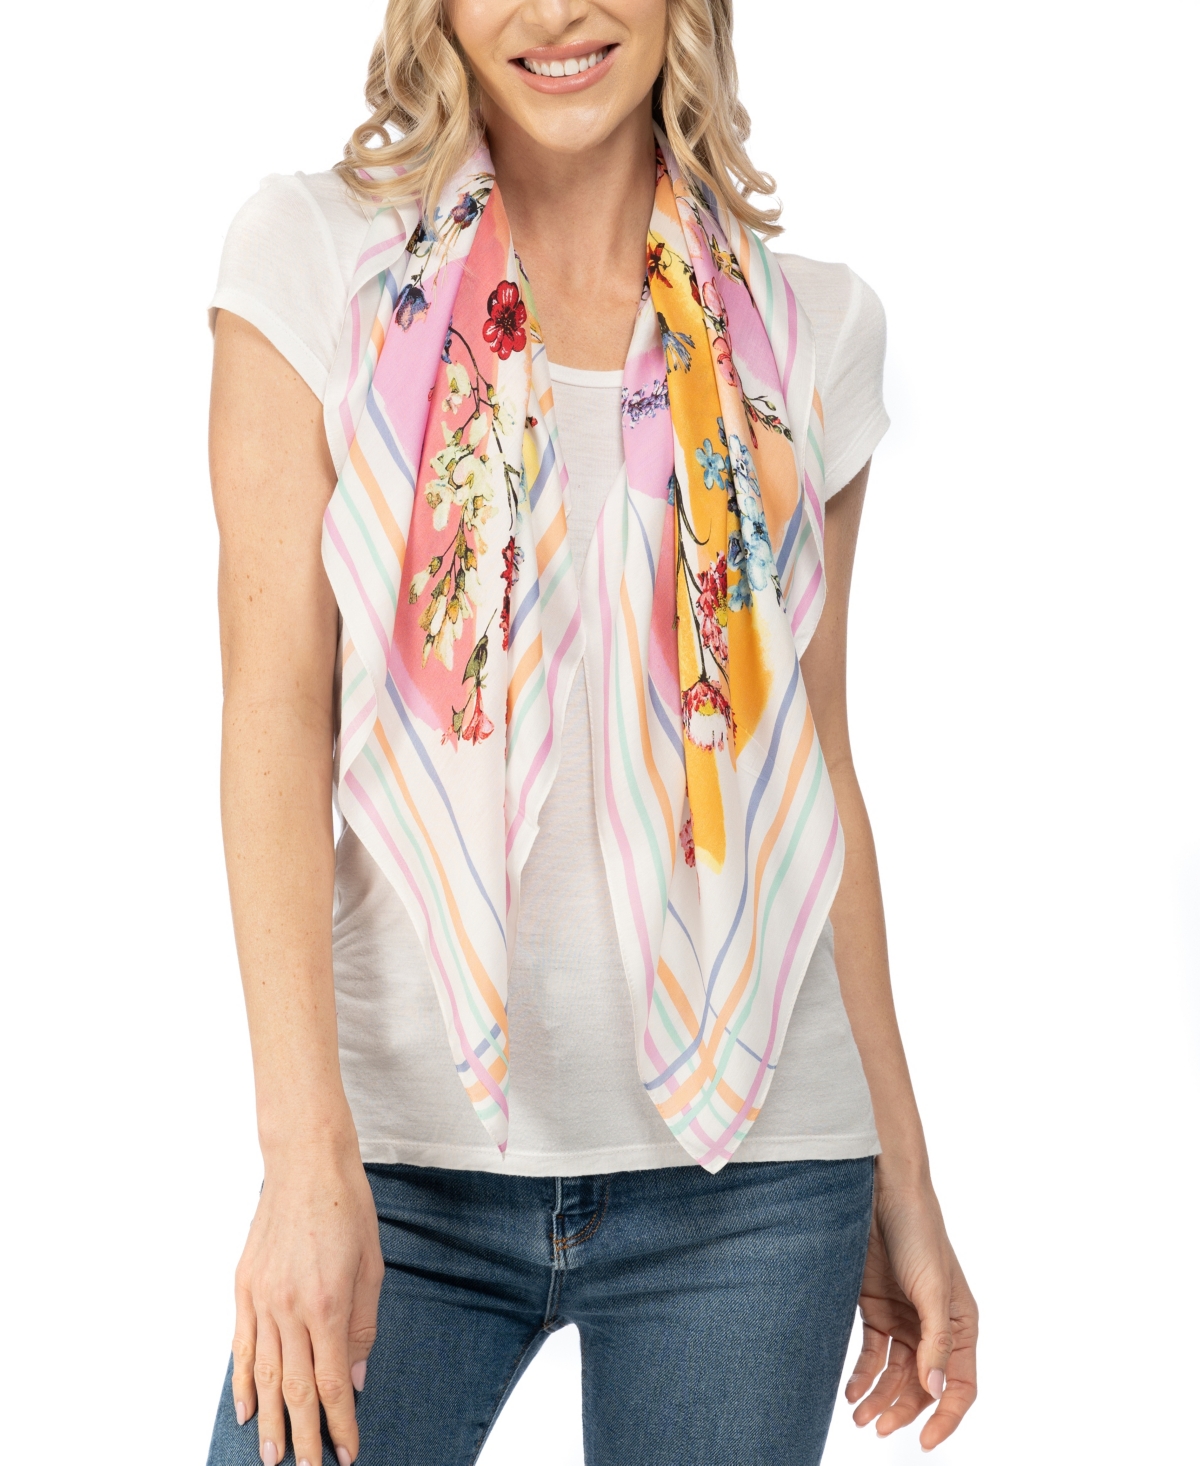 Botanical Watercolor Floral Square Scarf - Cool Multi